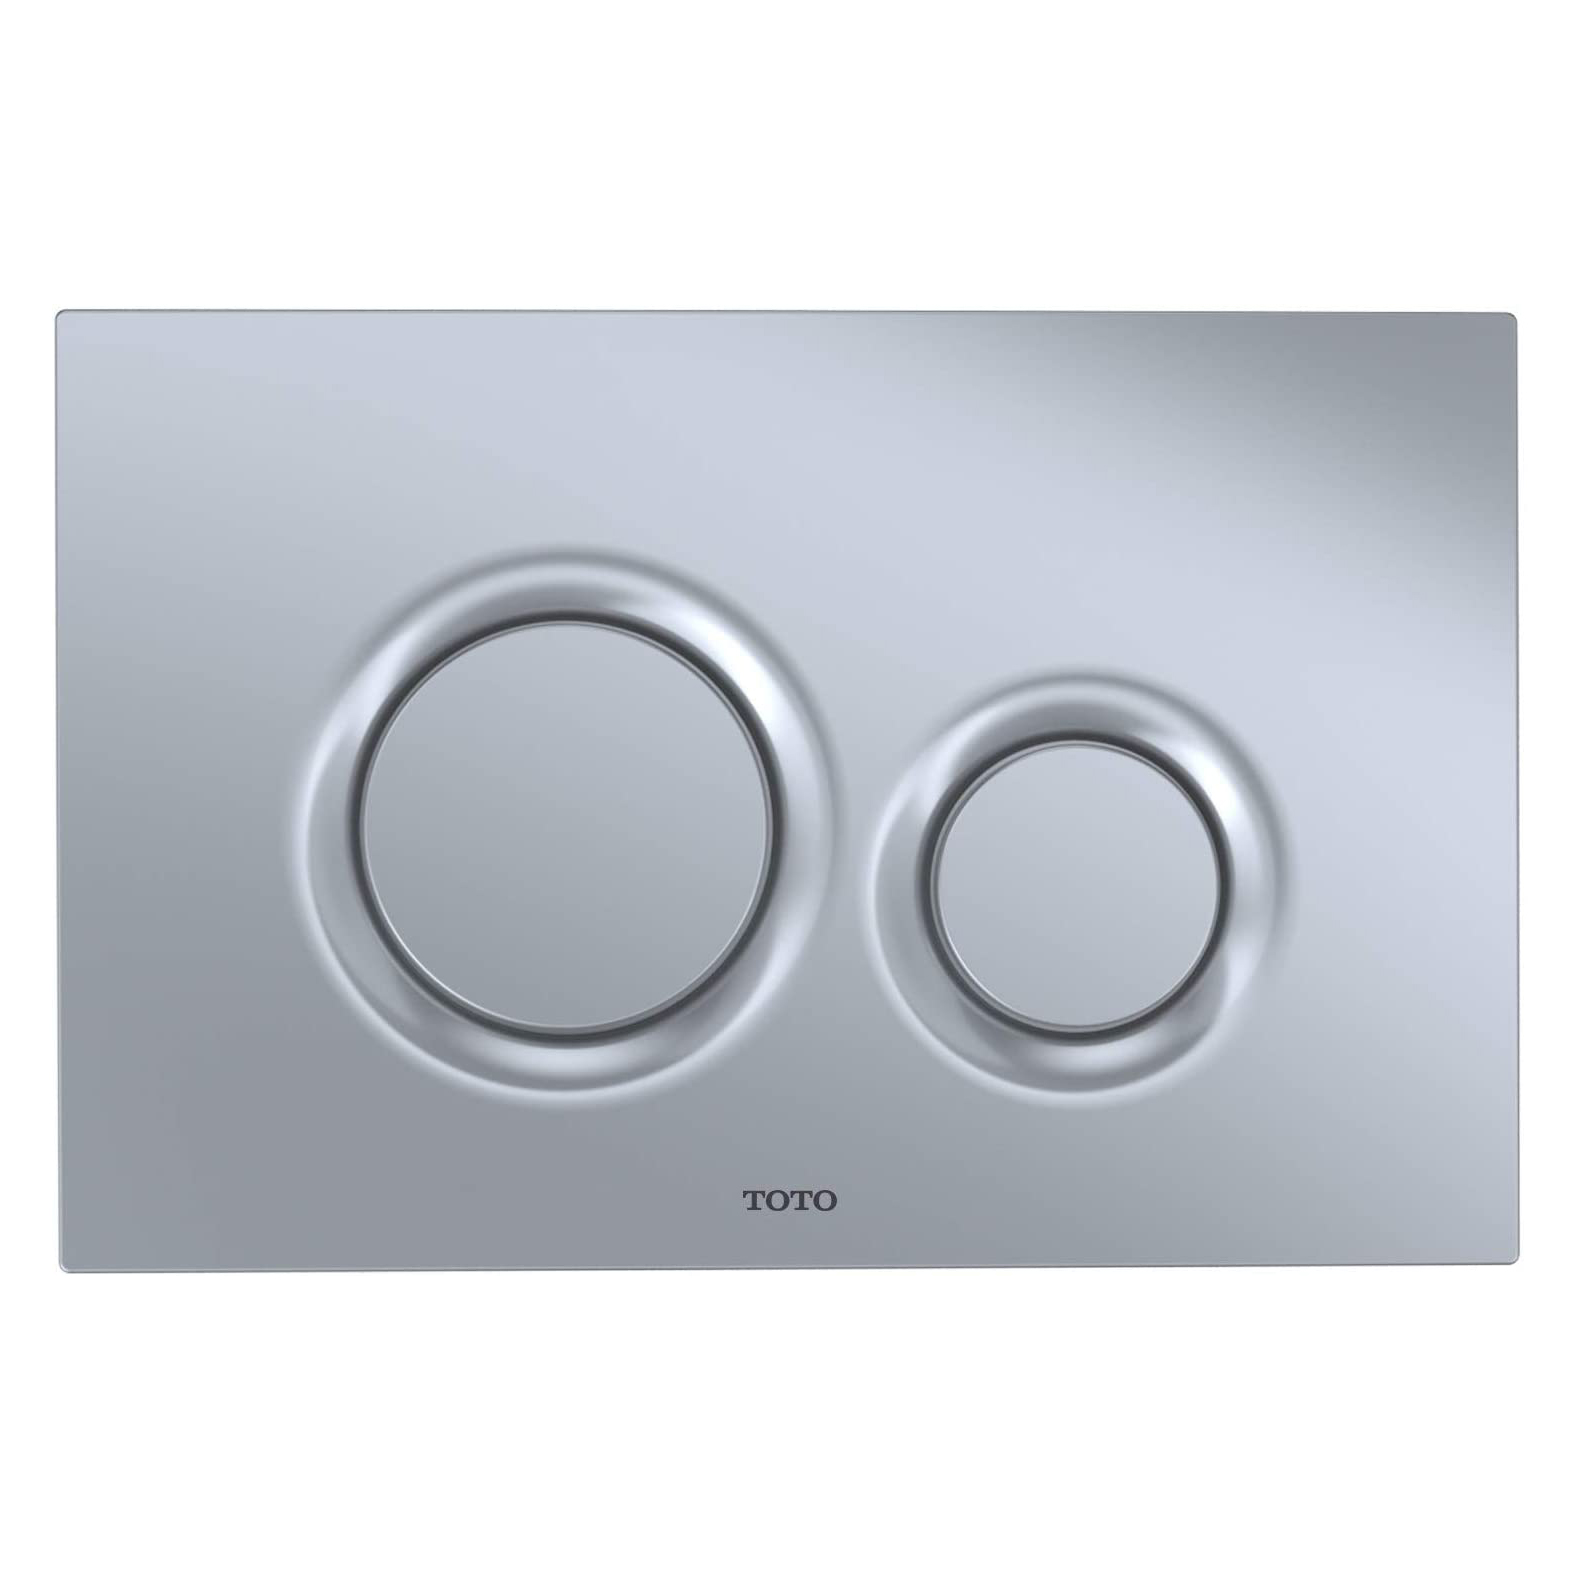 Basic Round Dual Button Push Plate in Matte Silver